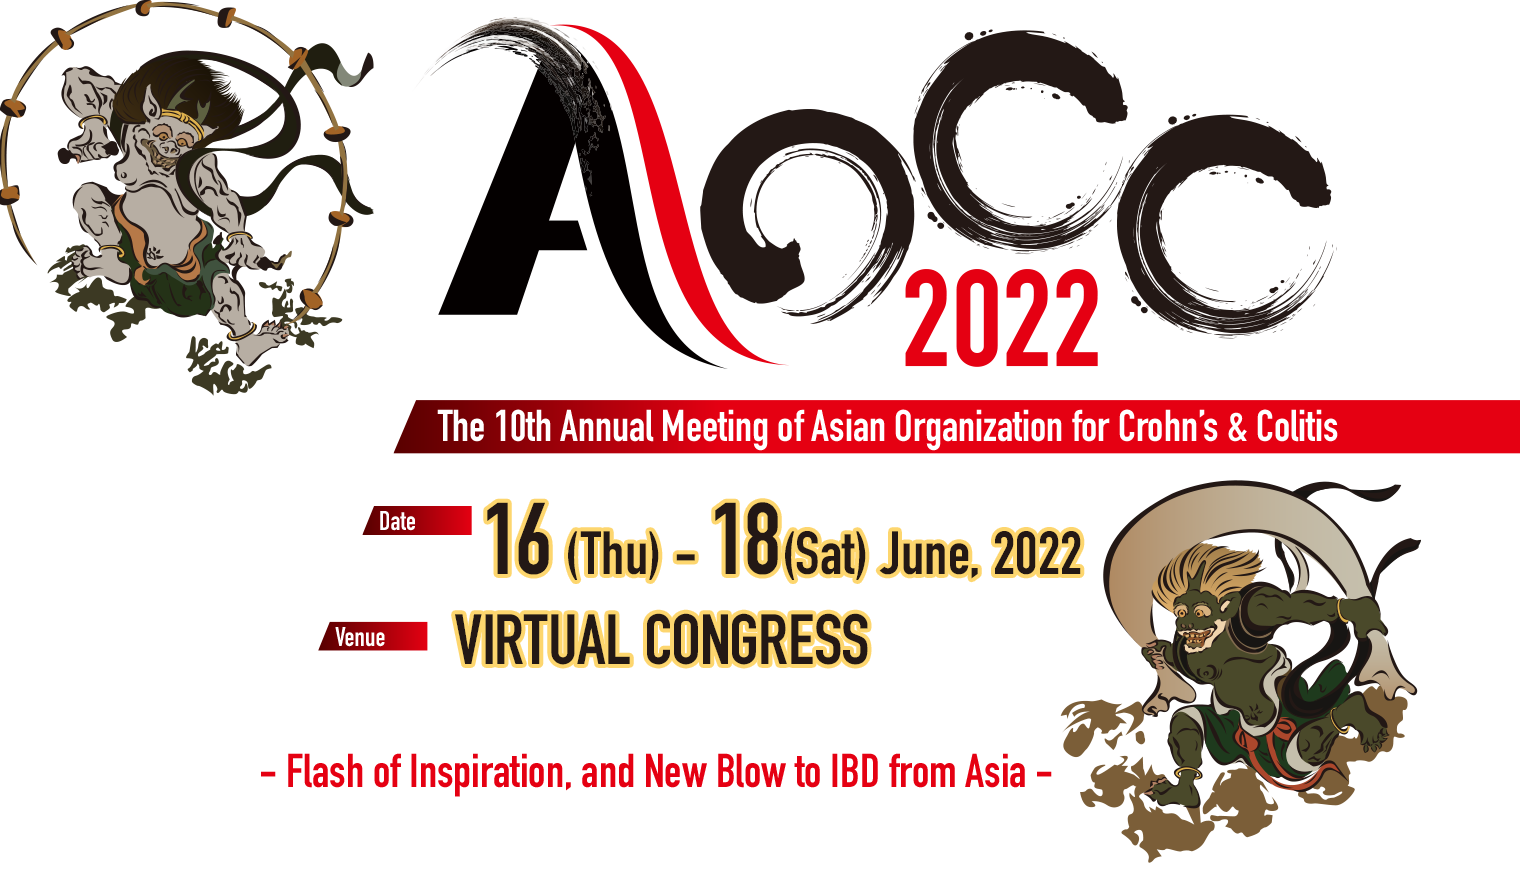 The 10th Annual Meeting of Asian Organization for Crohn’s and Colitis | Date: 16(Fri) - 18(Sat) June 2022 | Venue: VIRTUAL CONGRESS | Theme: - Flash of Inspiration, and New Blow to IBD from Asia -